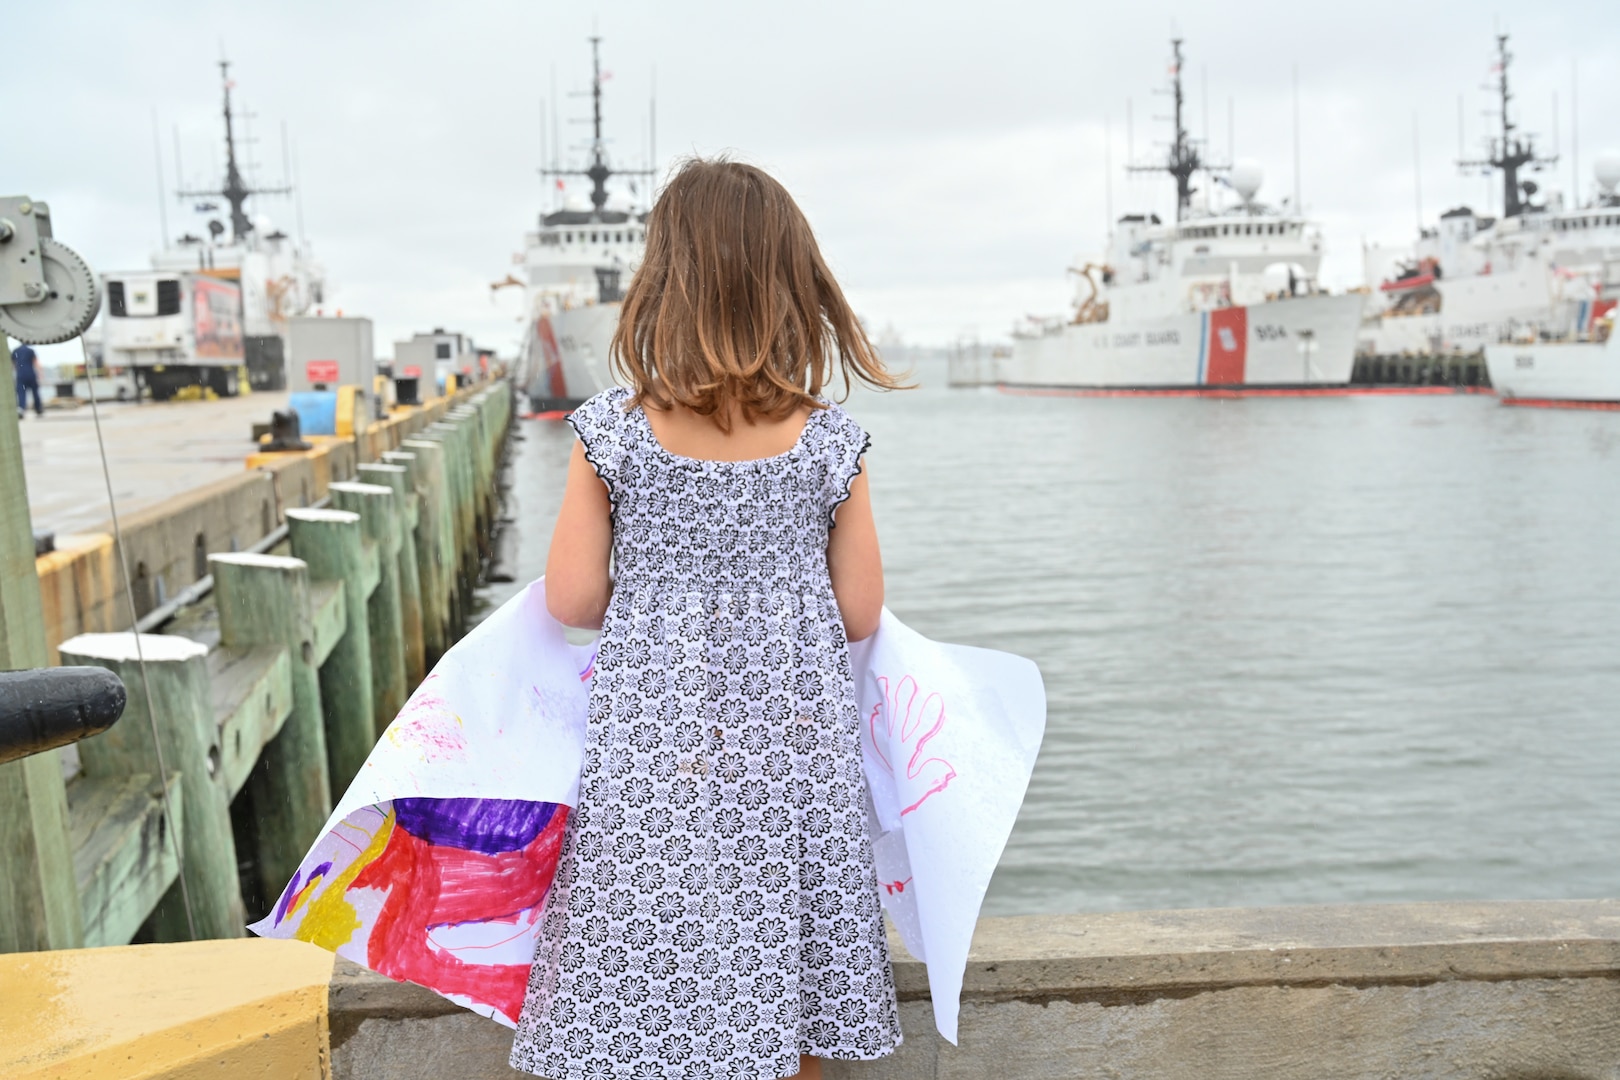 A young girl awaits the return of U.S. Coast Guard Cutter Forward (WMEC 911), Sept. 26, at the pier in Portsmouth, Virginia. Forward completed a two-and-a-half month-long patrol in the North Atlantic Ocean to support the Coast Guard Arctic Strategy and participate in the Canadian Armed Forces-led Operation Nanook 2023, an annual military exercise conducted to strengthen shared maritime objectives in the high northern latitudes. (U.S. Coast Guard photo by Petty Officer 2nd Class Brandon Hillard)